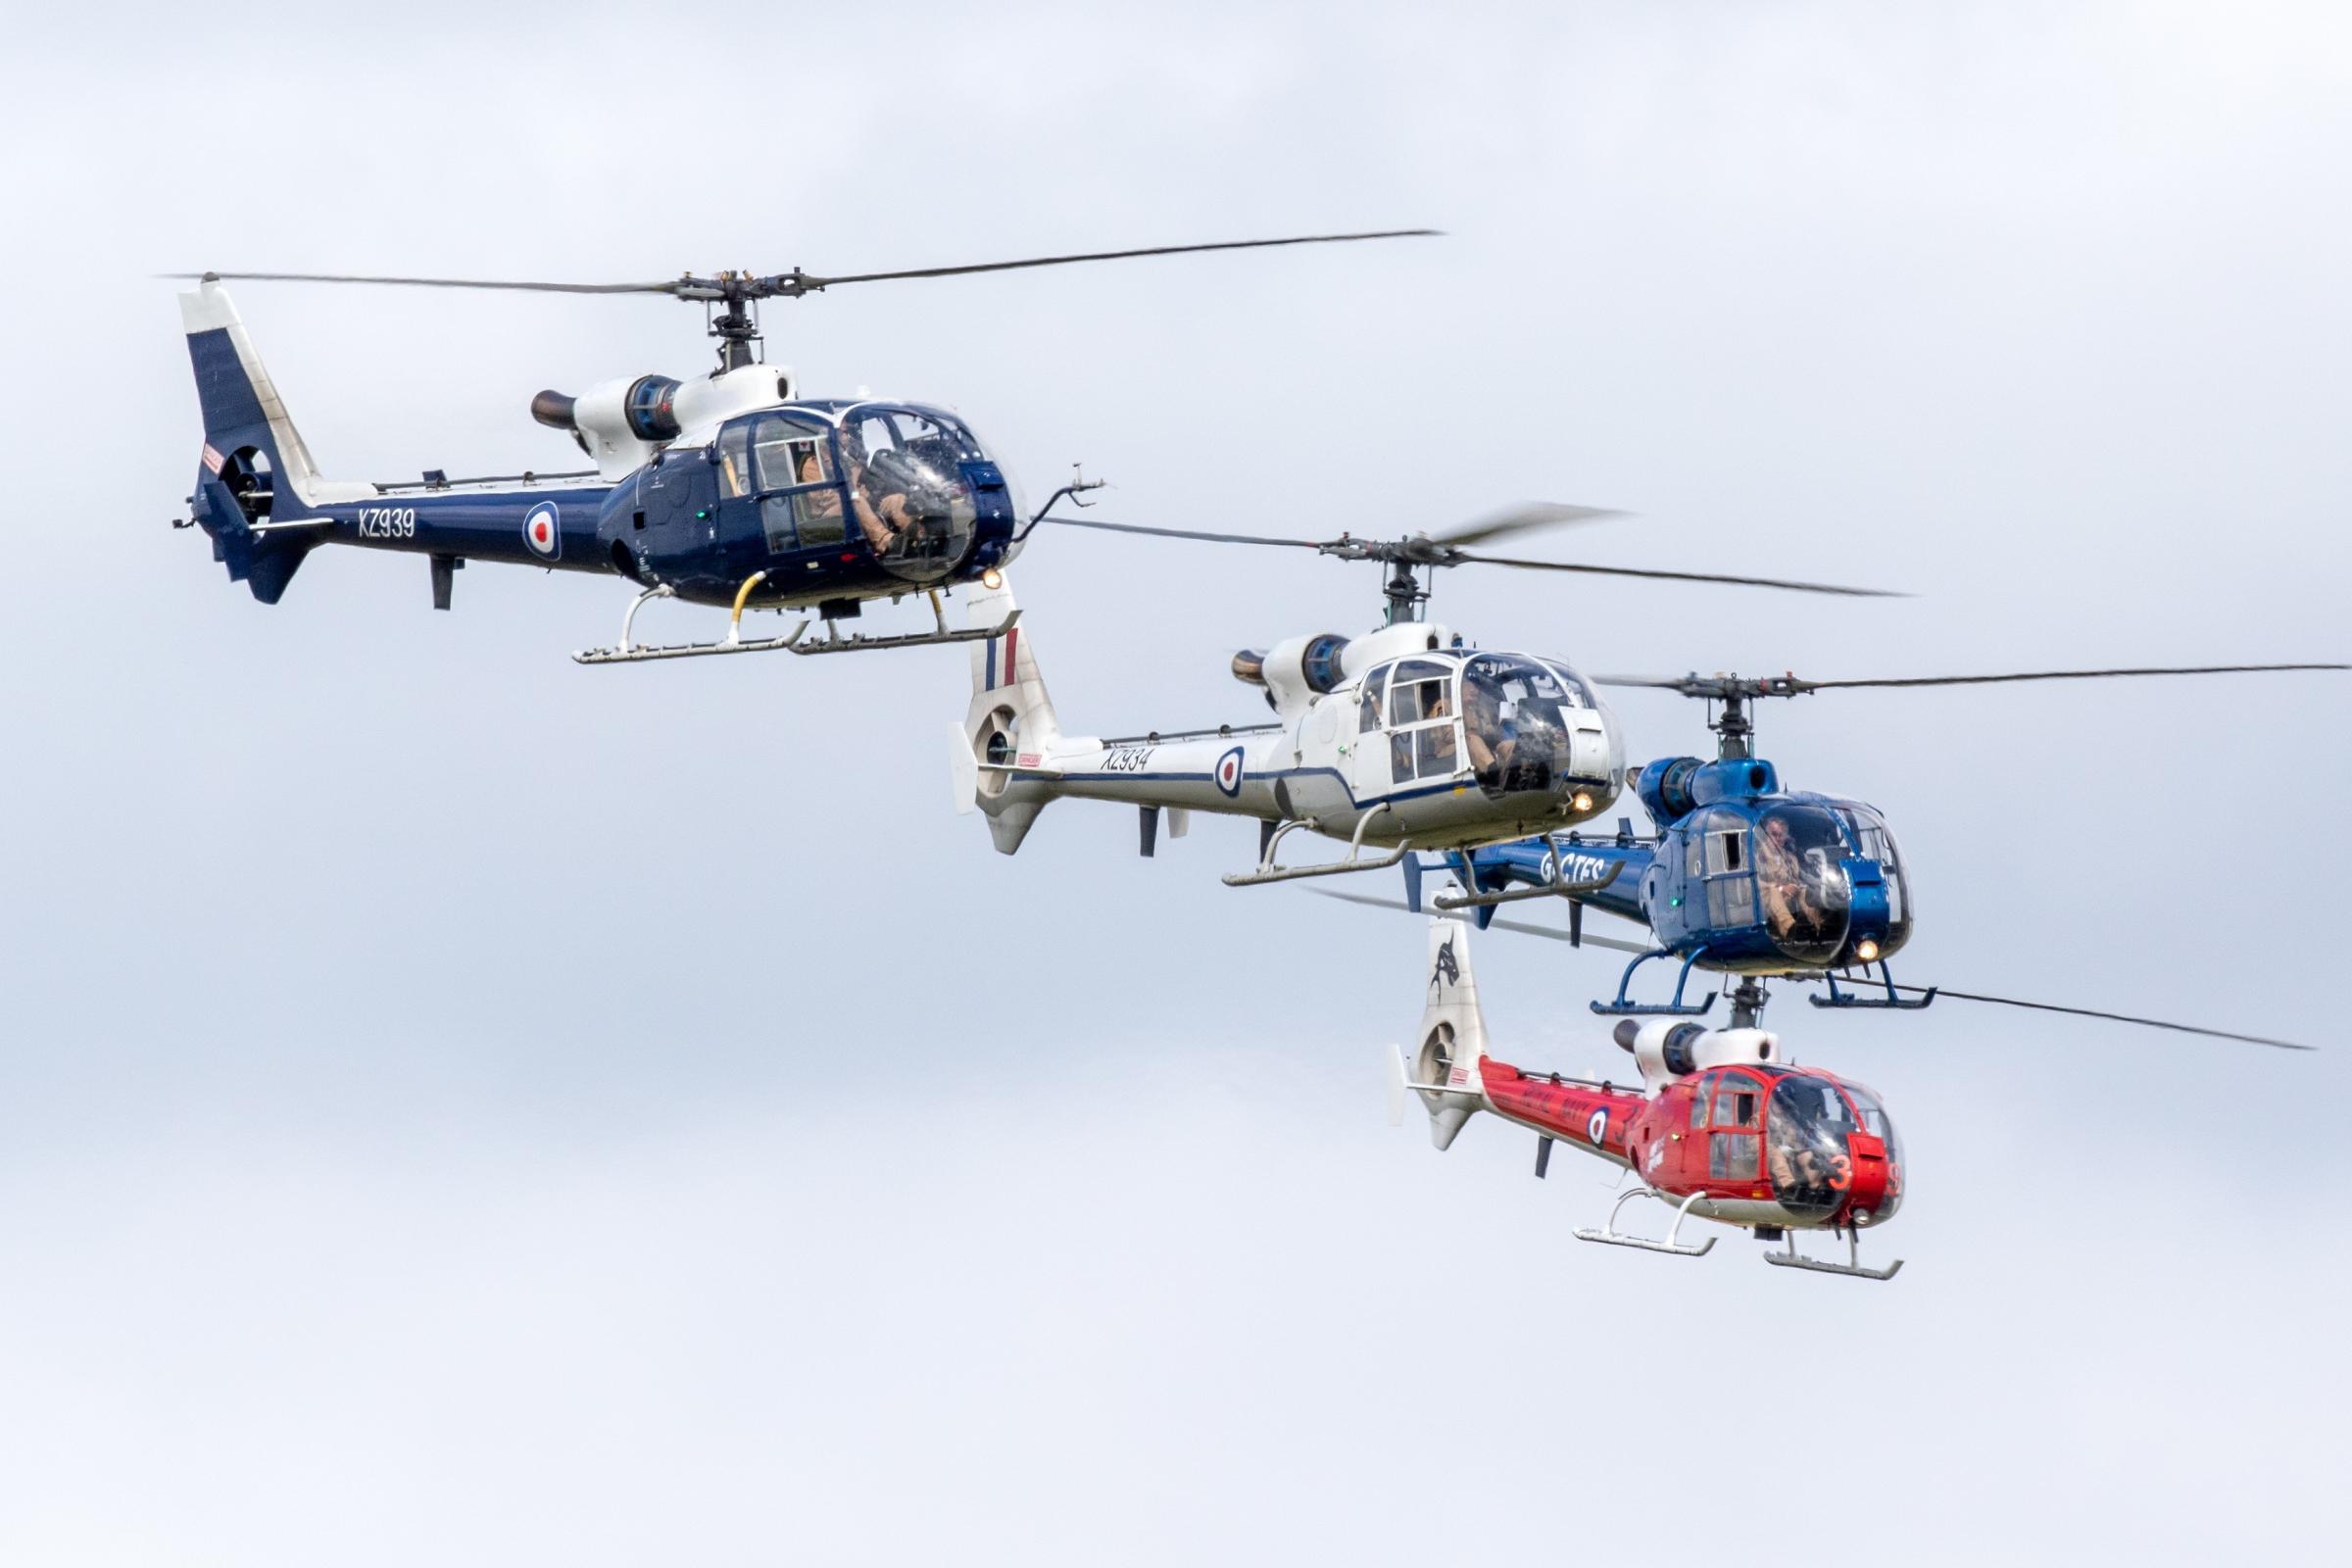 The Gazelle helicopter display squadron (Photo: Paul Johnson)